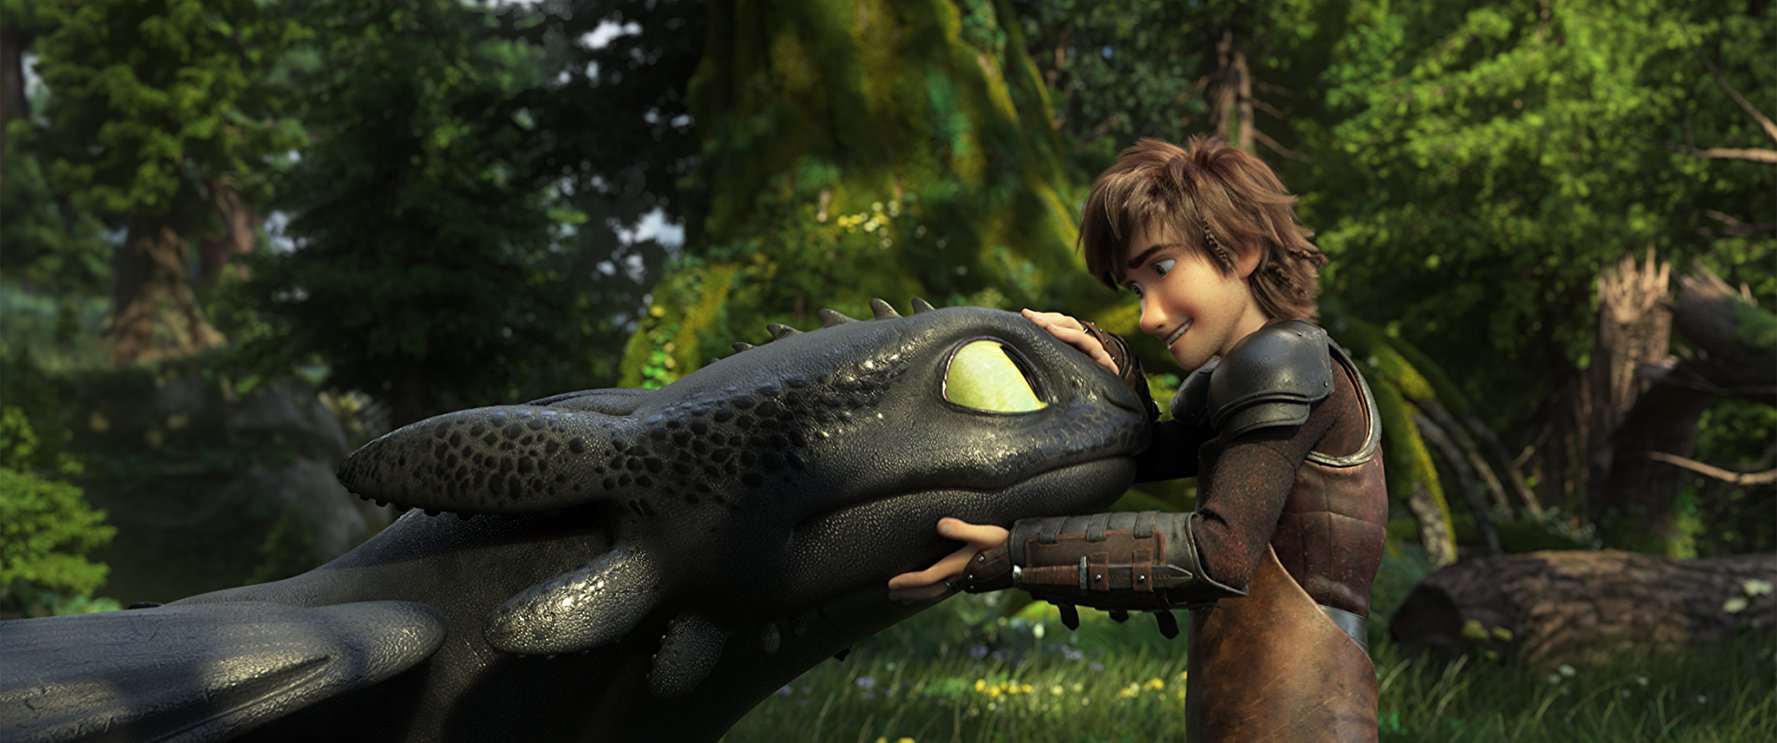 Hiccup Horrendous and the Toothless dragon